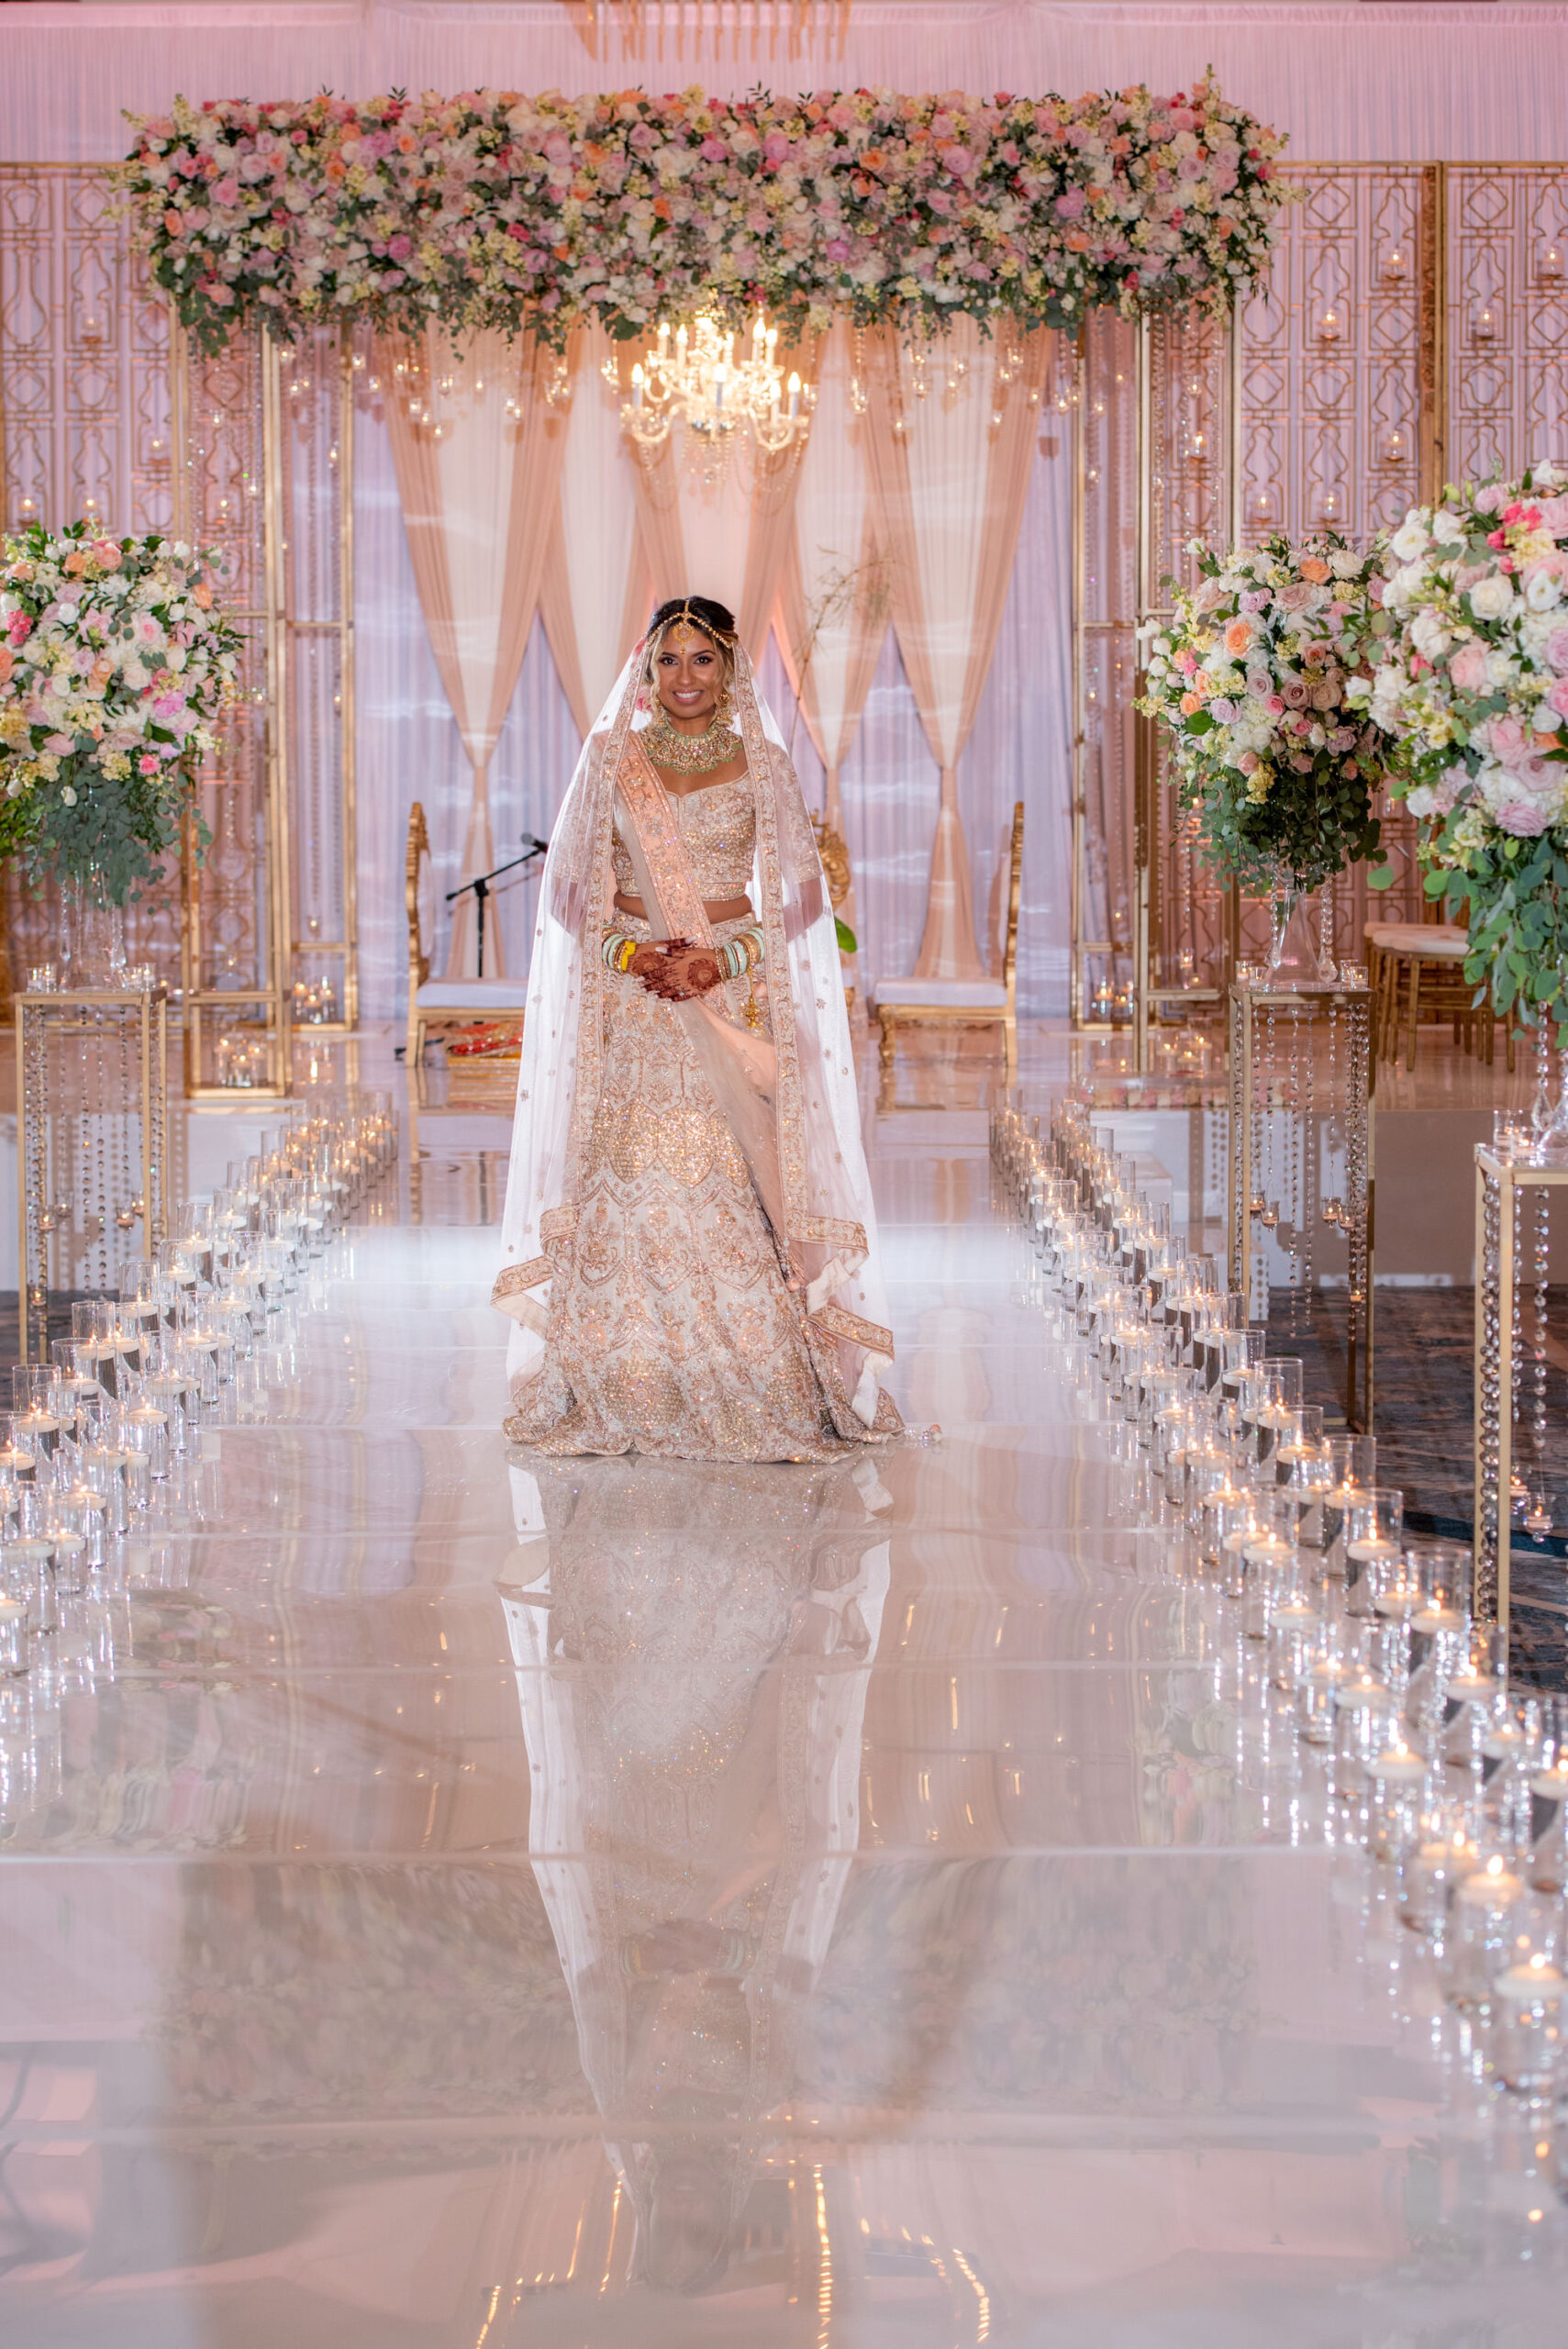 Tampa Bay Bride In Luxurious Wedding Ceremony, Lush Floral Arrangements with White, Pink and Red Florals, Candlelight Aisle with Draping and Chanderlier Lighting, Wearing Ivory and Rose Gold Saree | Michele Renee the Studio | Florida Wedding Venue Hilton Downtown Tampa